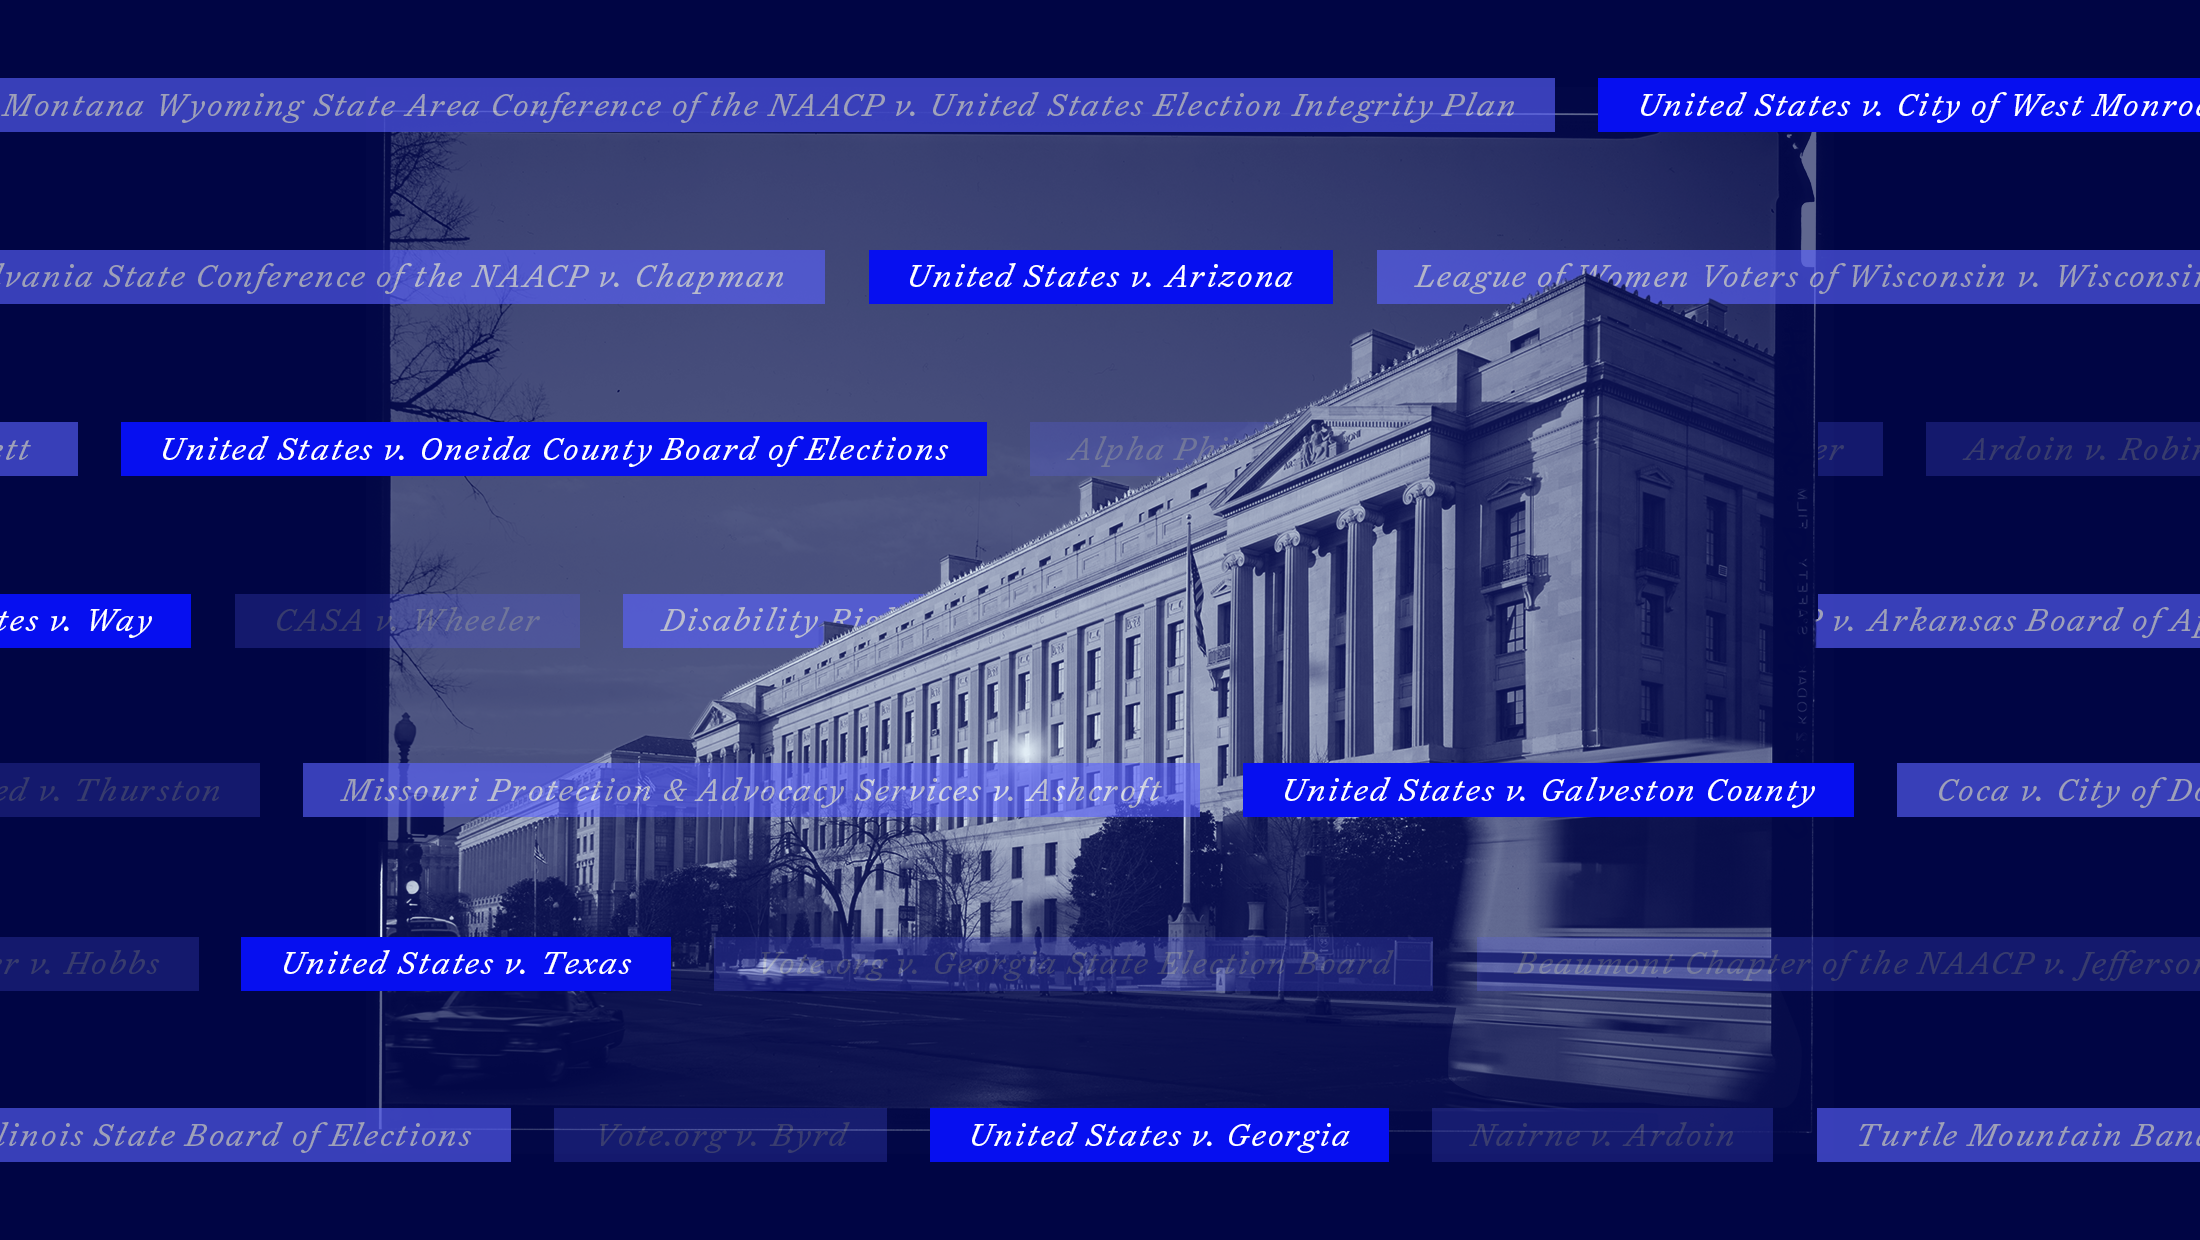 The DOJ building on a dark blue background. Overlaying the DOJ building are lawsuit names tinted in three different shades of blue representing the DOJ's level of involvement in a given case. Case names in the darkest shade of blue indicate the DOJ filed the case, case names in the medium shade of blue indicate the DOJ was involved in some capacity and case names in the lightest shade of blue indicate the DOJ was not at all involved. The case names in the darkest shade of blue include: United States v. Texas, United States v. Galveston County, United States v. Arizona, United States v. Georgia , United States v. Oneida County Board of Elections, United States v. Way and United States v. City of West Monroe. The case names in the medium shade of blue include Pennsylvania State Conference of the NAACP v. Chapman, Colorado Montana Wyoming State Area Conference of the NAACP v. United States Election Integrity Plan, League of Women Voters of Wisconsin v. Wisconsin Elections Commission, Disability Rights Florida v. Lee, Arkansas State Conference NAACP v. Arkansas Board of Apportionment, Missouri Protection & Advocacy Services v. Ashcroft, Coca v. City of Dodge City, Turtle Mountain Band of Chippewa Indians v. Jaeger and Bost v. Illinois State Board of Elections. Finally, the case names in the lightest shade of blue include: CASA v. Wheeler, Ardoin v. Robinson, Arkansas United v. Thurston, Palmer v. Hobbs, Vote.org v. Georgia State Election Board, Beaumont Chapter of the NAACP v. Jefferson County, Nairne v. Ardoin, Vote.org v. Byrd and Alpha Phi Alpha Fraternity Inc. v. Raffensperger.